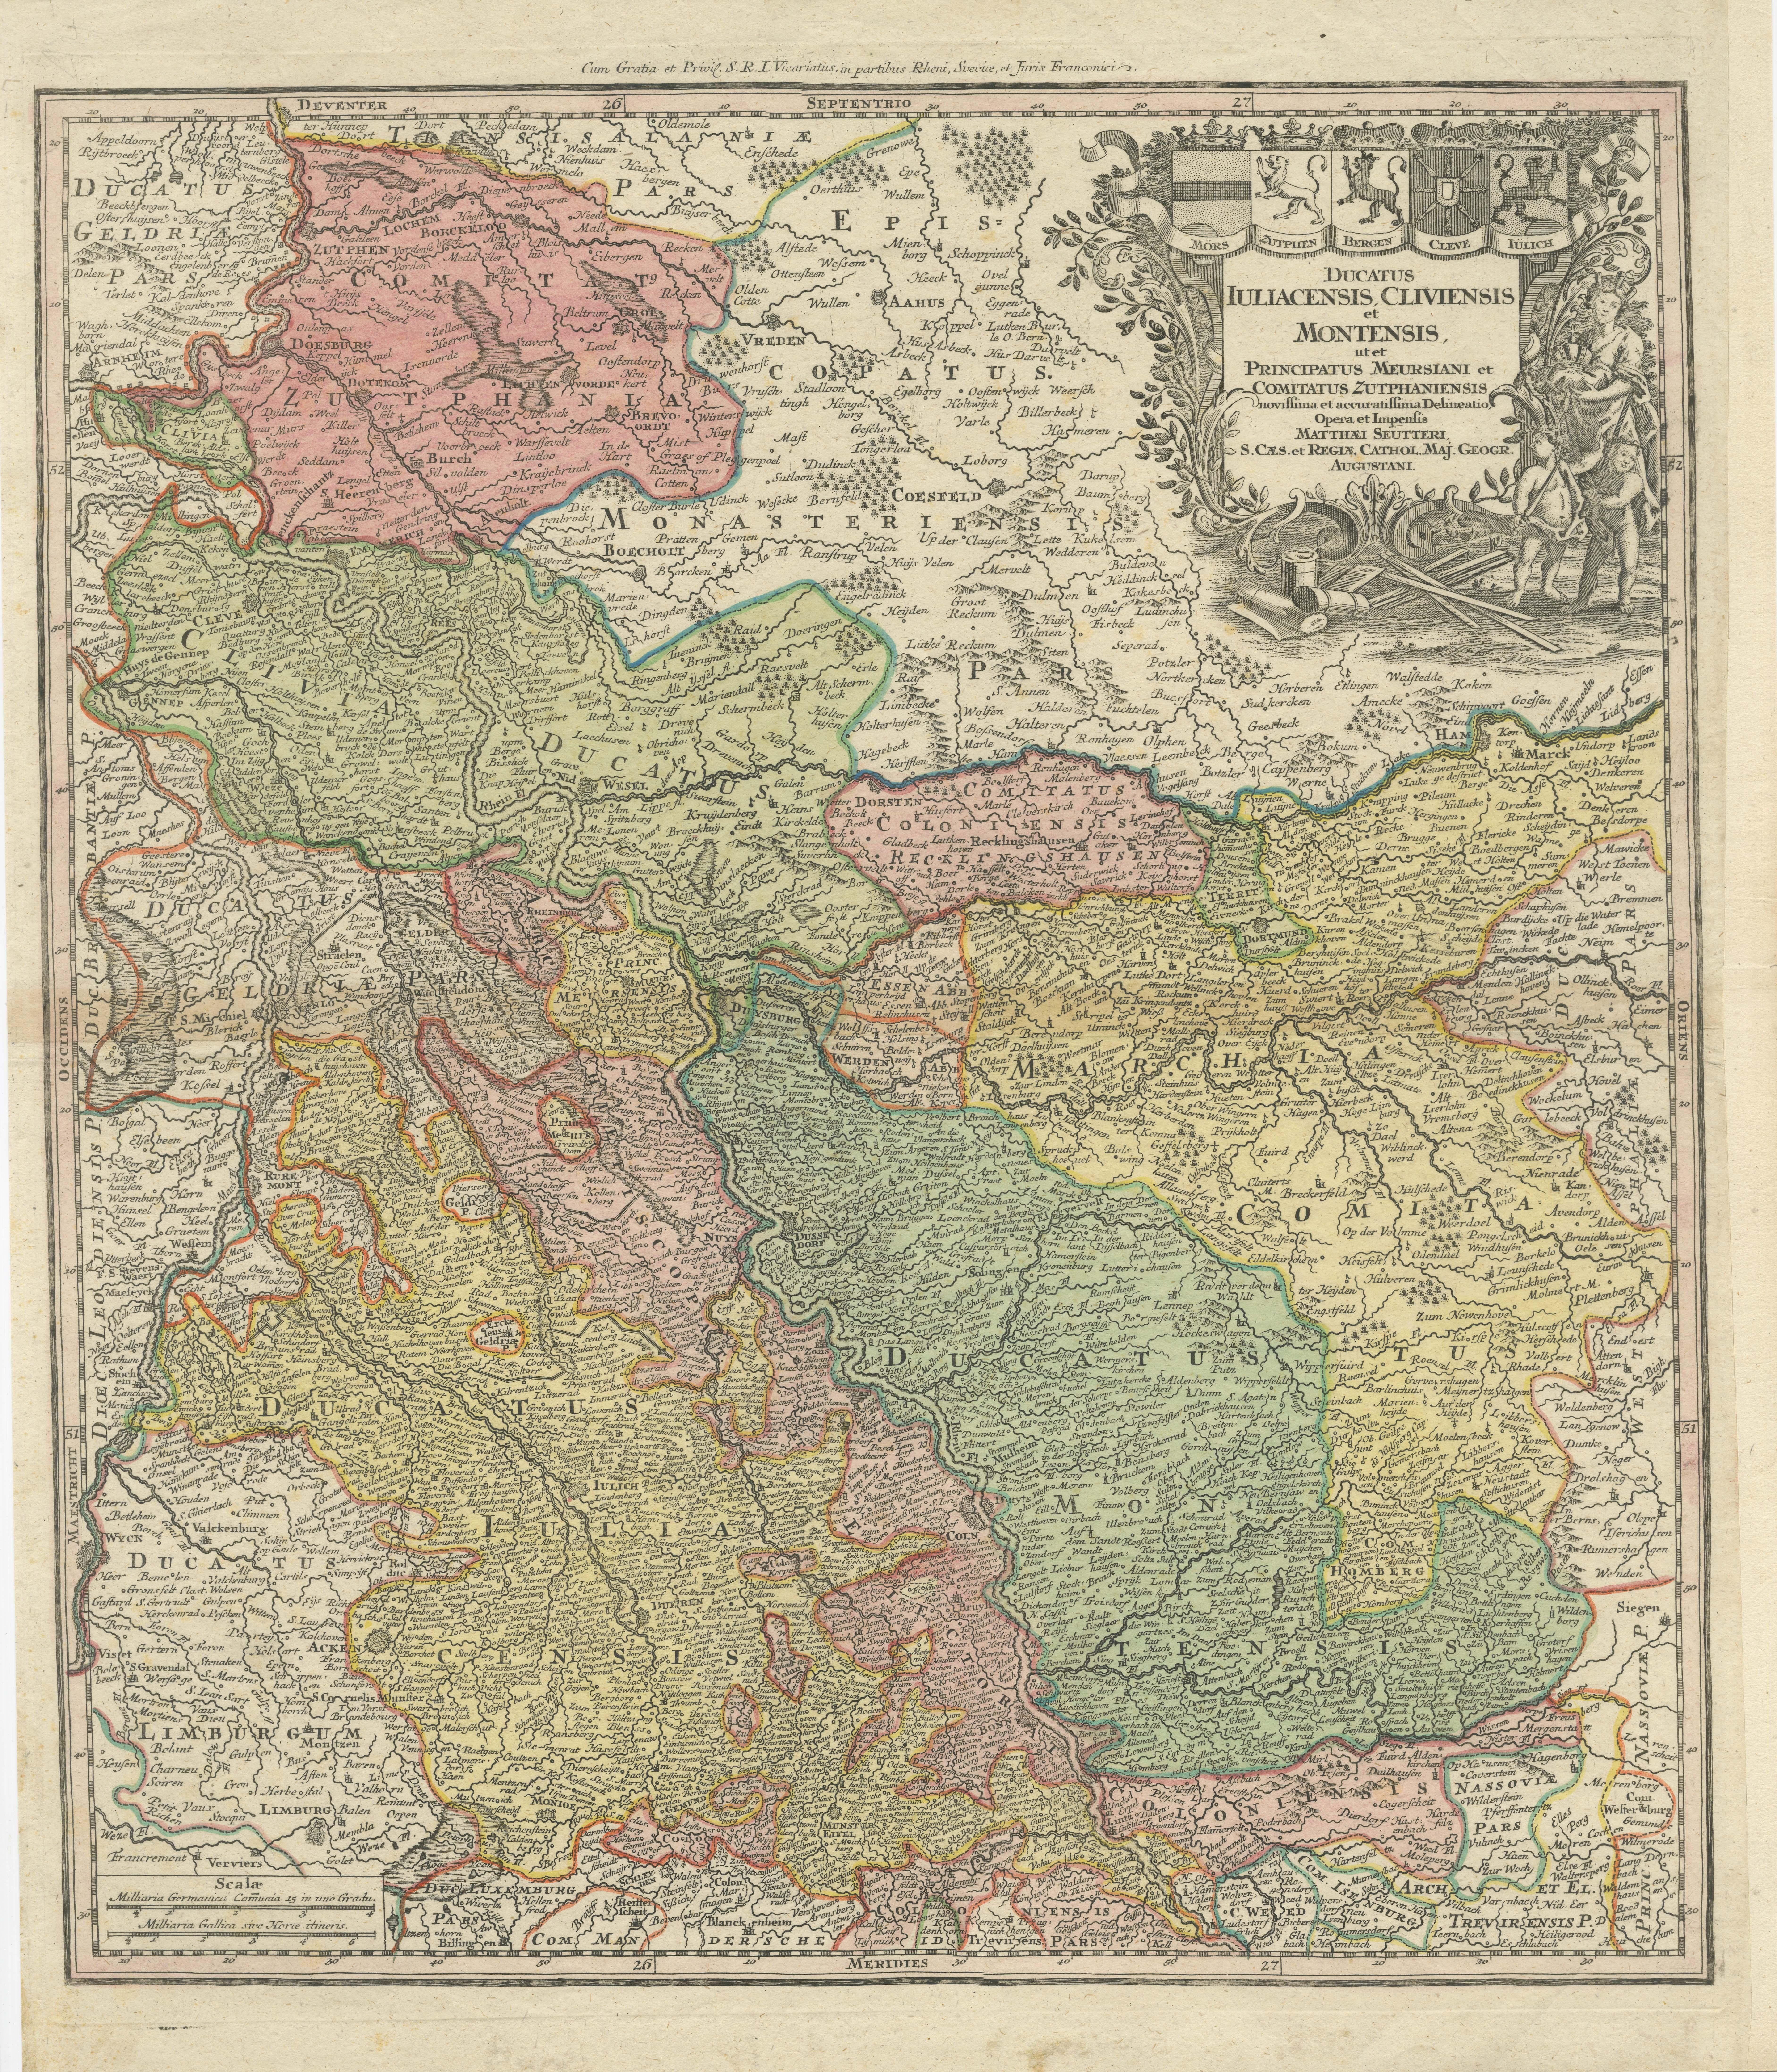 Antique map titled 'Ducatus Iuliacensis Cliviensis et Montensis (..)'. Original old map of Western Germany with part of the Netherlands. Published by M. Seutter, circa 1750. 

George Matthaus Seutter, a German publisher, cartographer and engraver